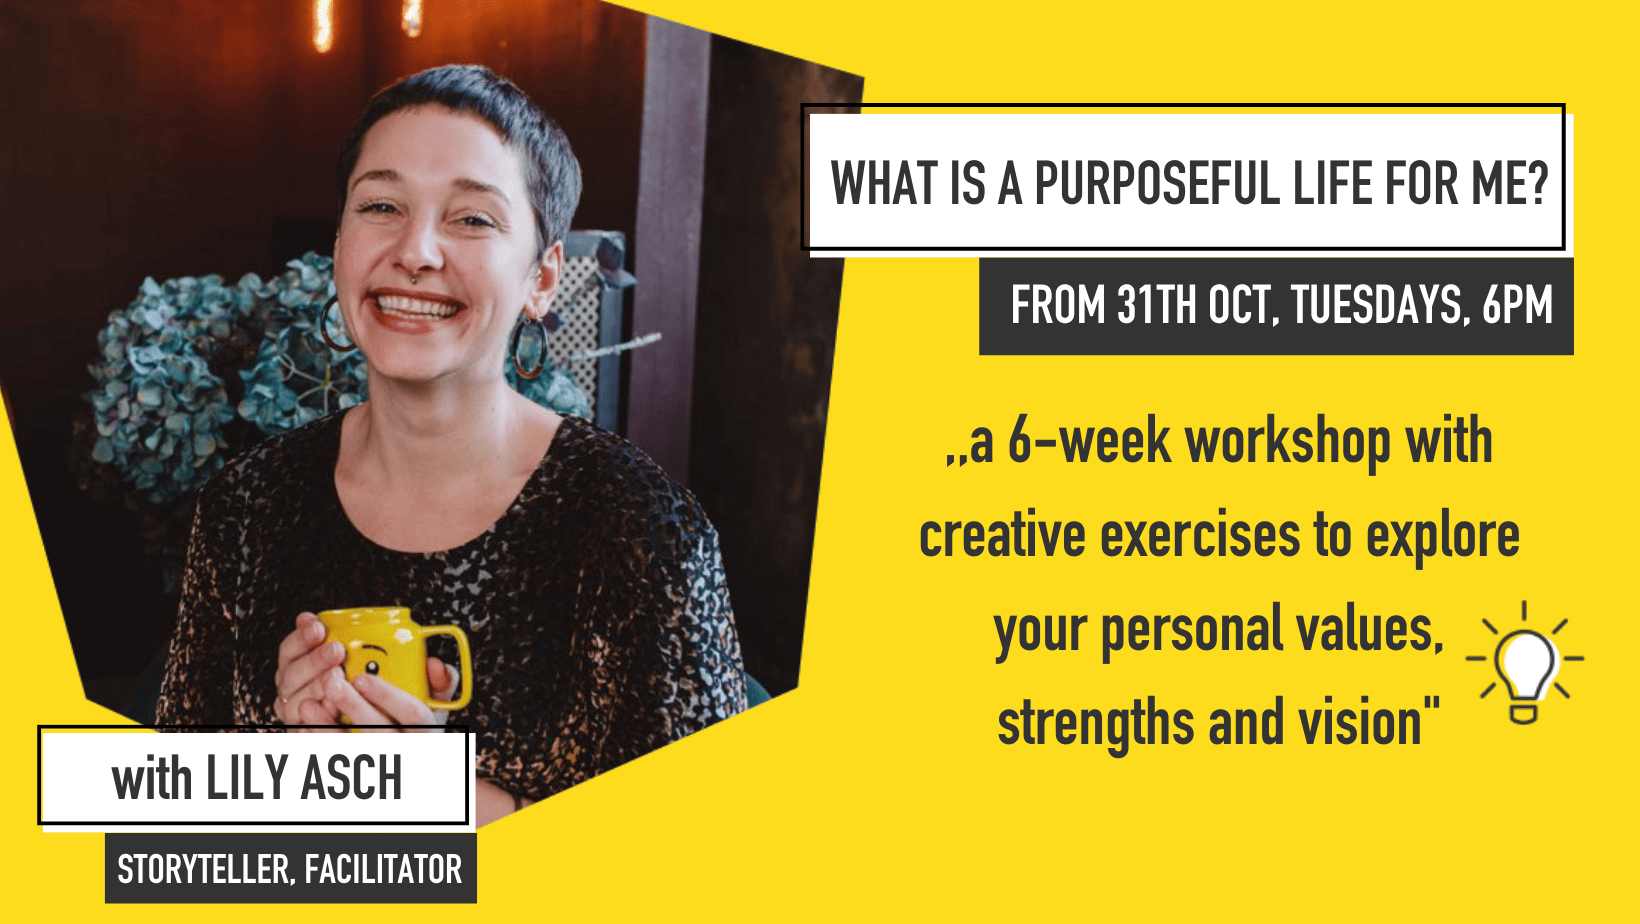 WHAT IS A PURPOSEFUL LIFE FOR ME❓FROM 31 OCT